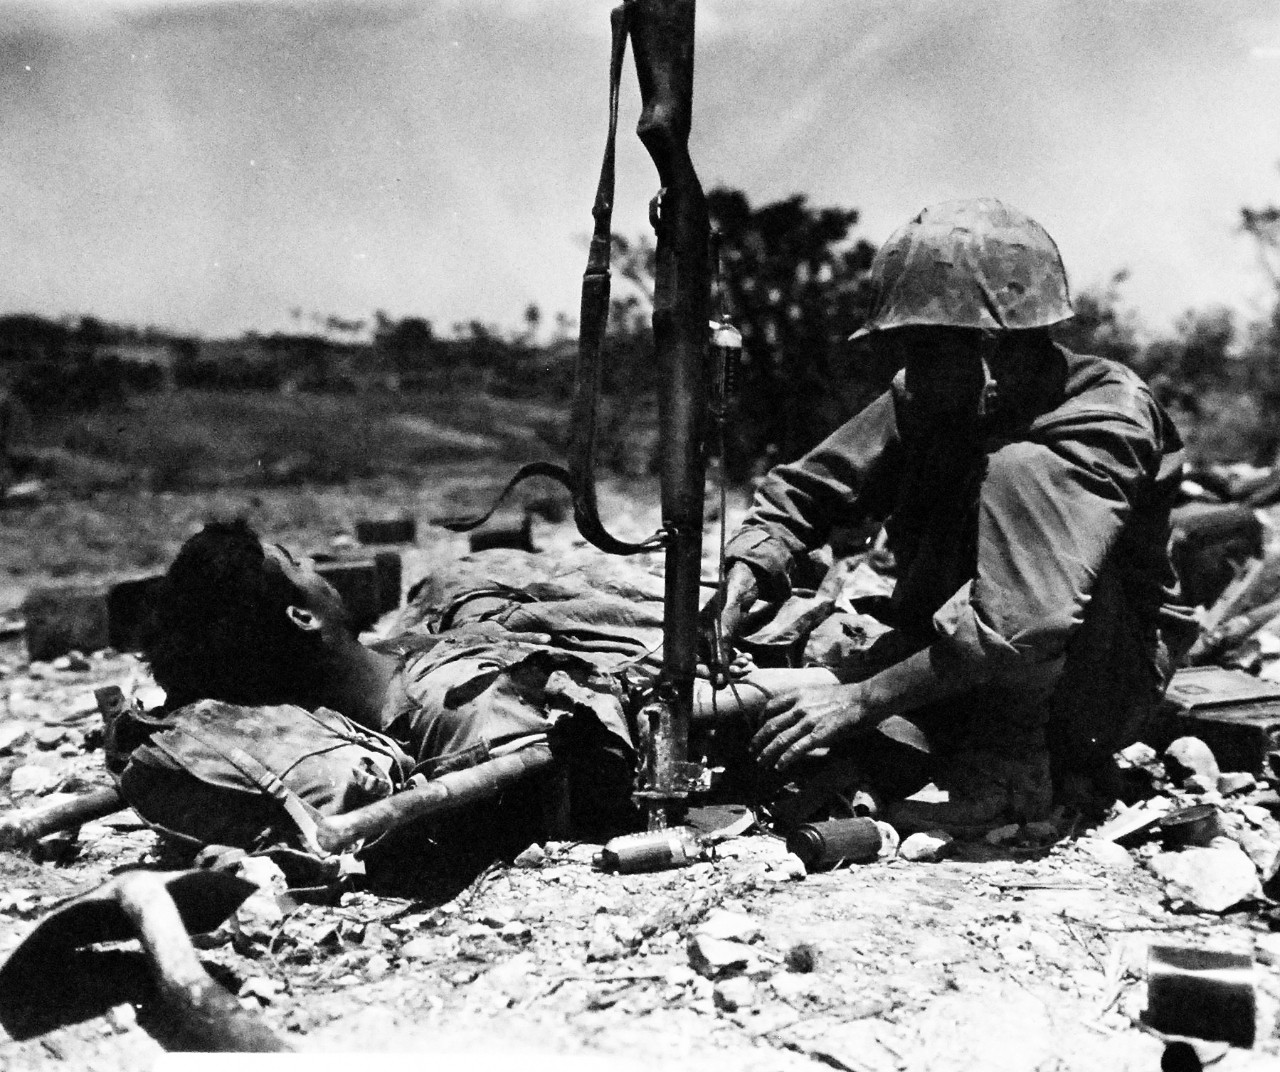 127-GW-667-120199:  Okinawa Campaign, April-June 1945.   Plasma given to a wounded Marine on Okinawa.  Photographed by Bushemi, May 1945.  Official U.S. Marine Photograph, now in the collection of the National Archives.  (2014/7/23). 